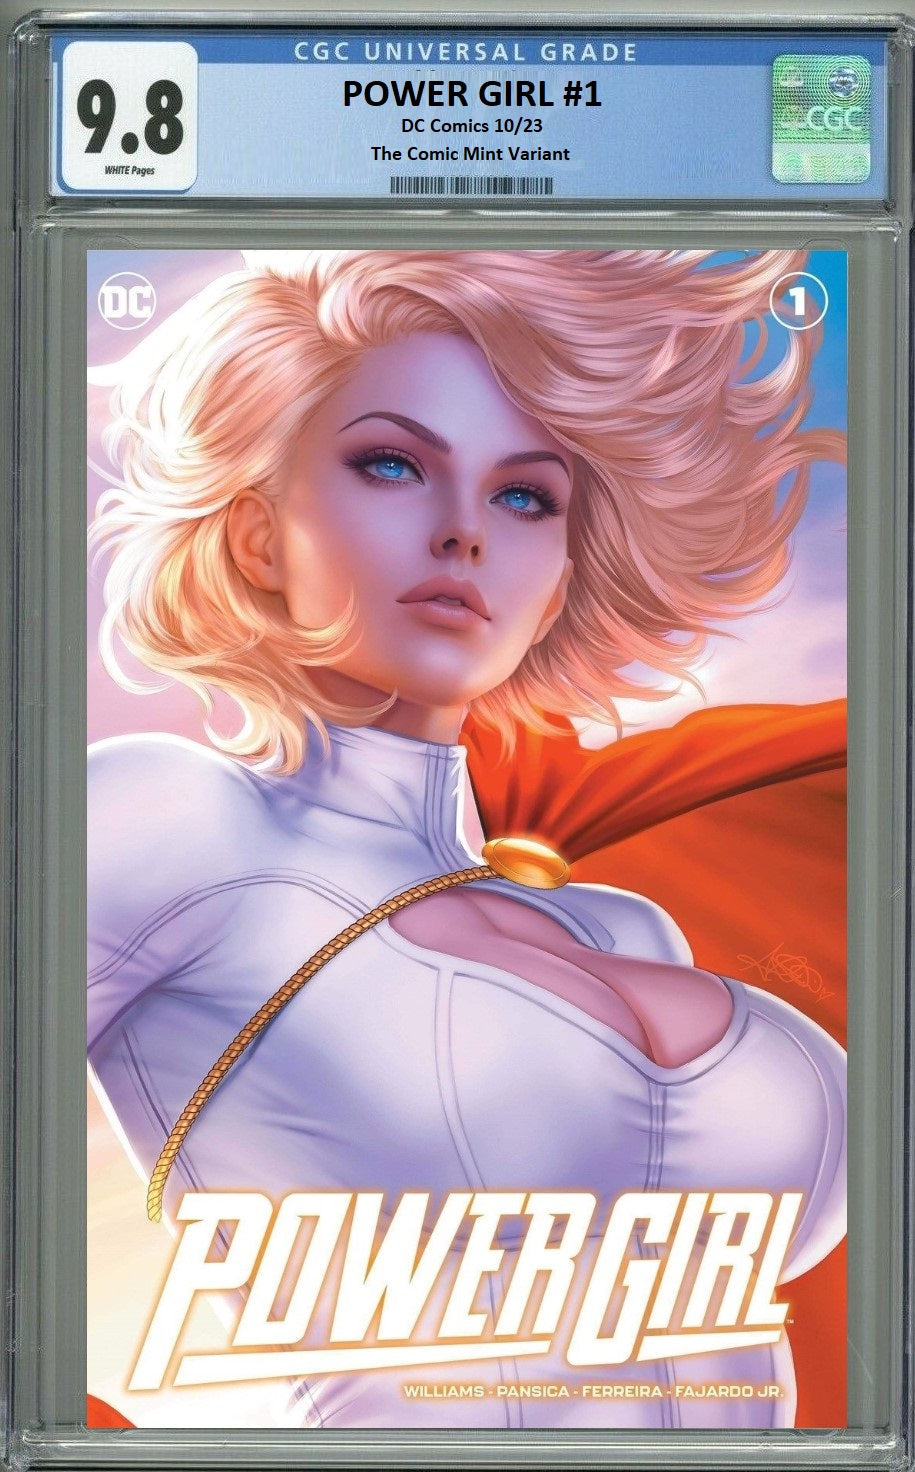 POWER GIRL #1 ARIEL DIAZ TRADE DRESS VARIANT LIMITED TO 3000 COPIES CGC 9.8 PREORDER